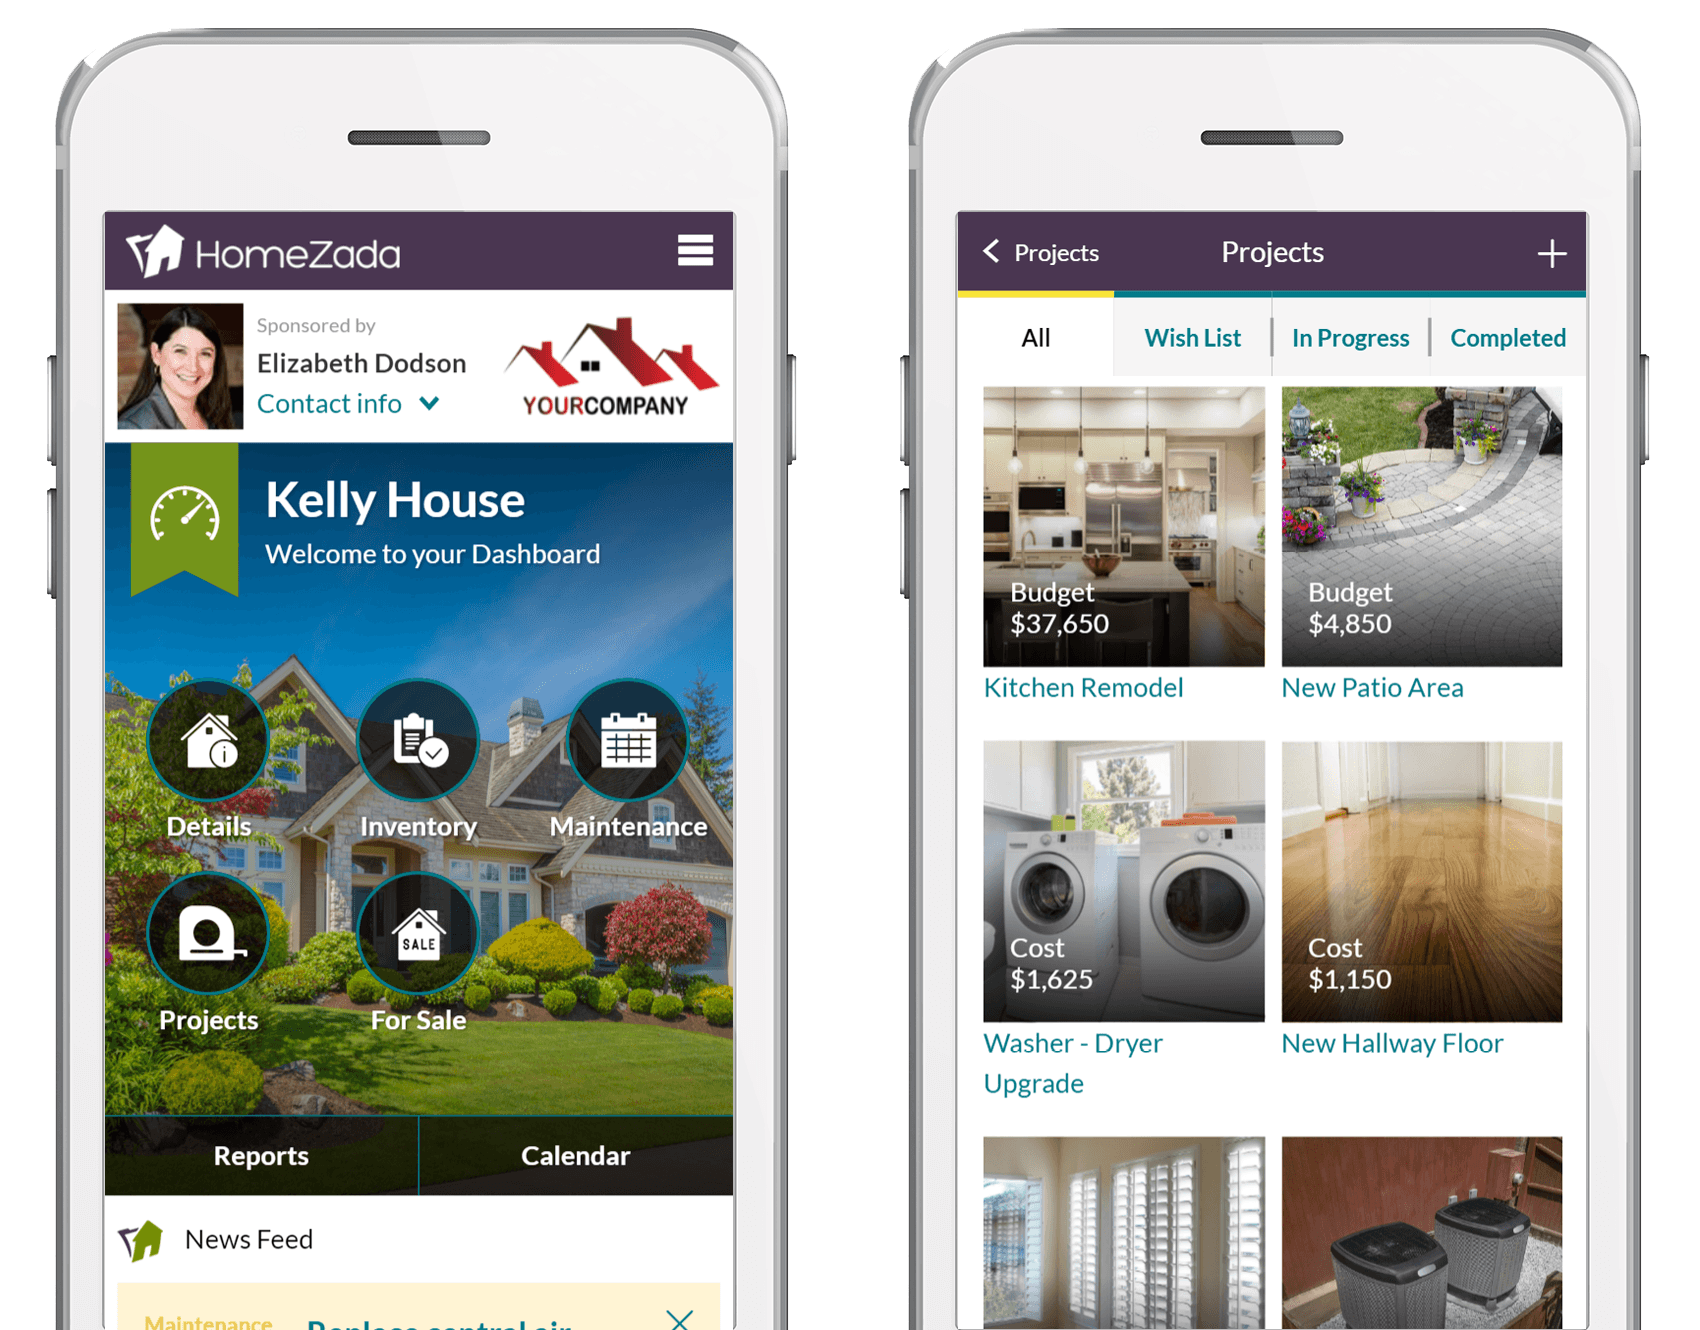 Homezada pro branding ad for realtors and real estate agents